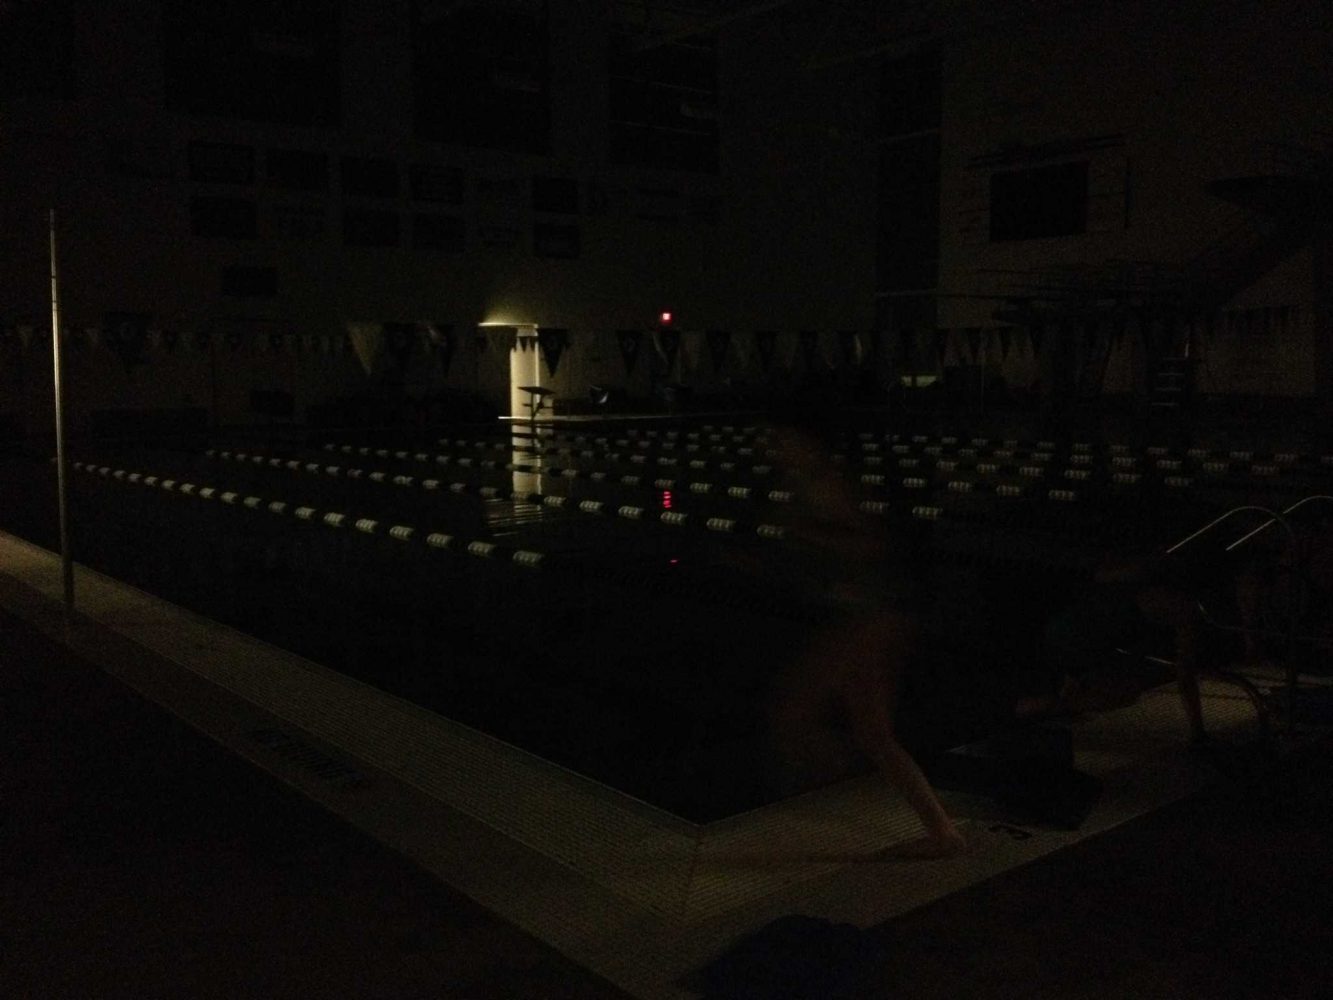 Pattonville blacks out because of power failure